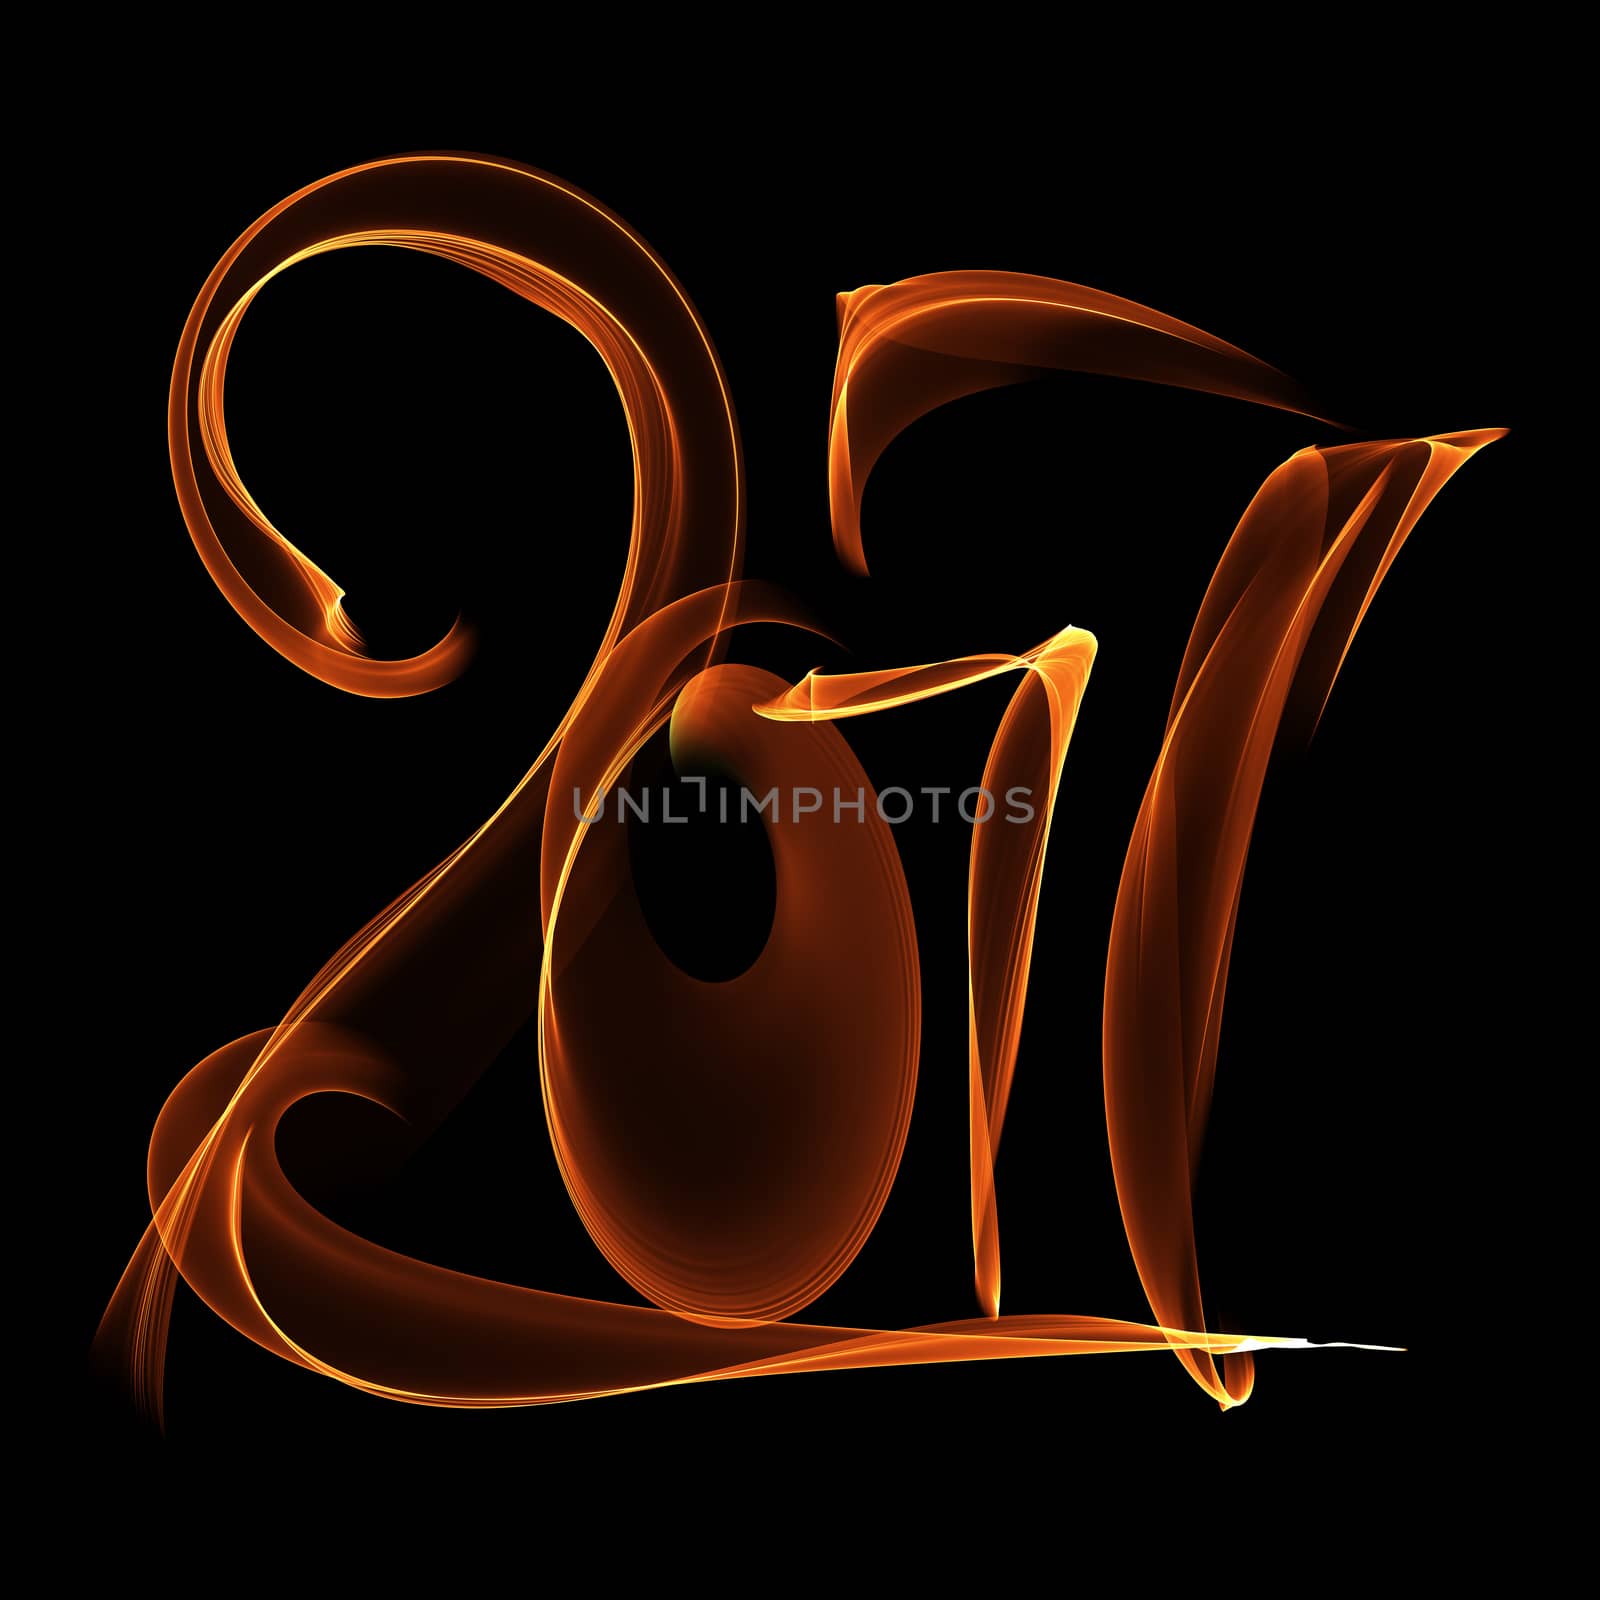 Happy new year 2017 flying digits numbers written with fire flame light on black background by skrotov